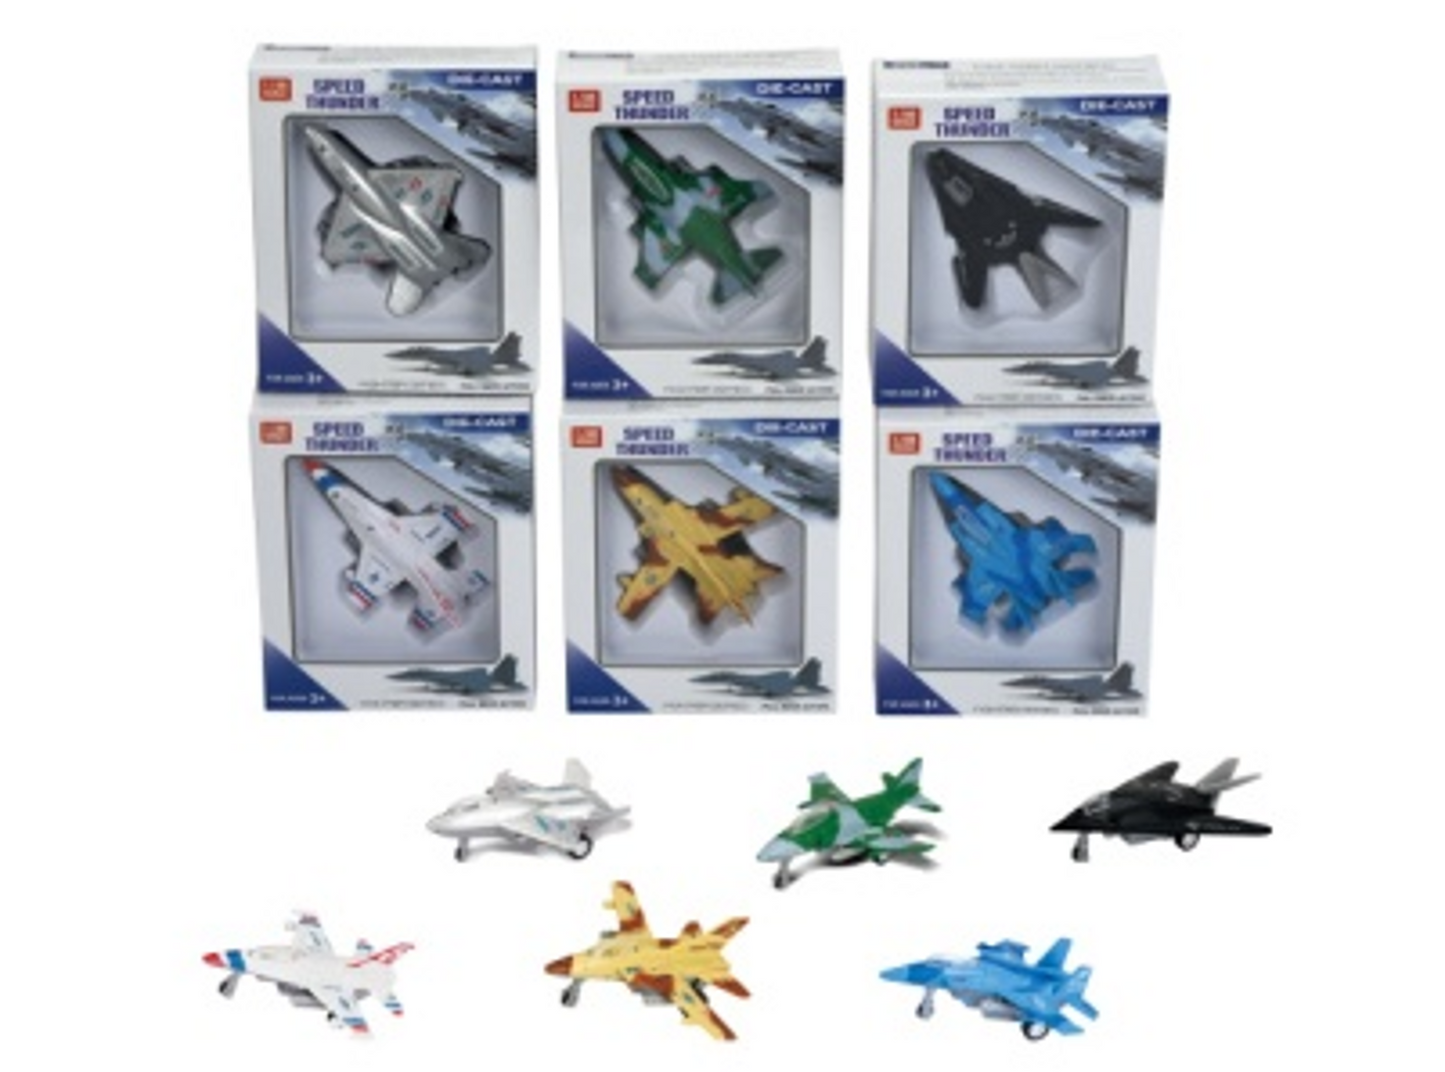 Die-Cast Small Military Fighter Jets Individual Retail Boxes, Listing for All 6